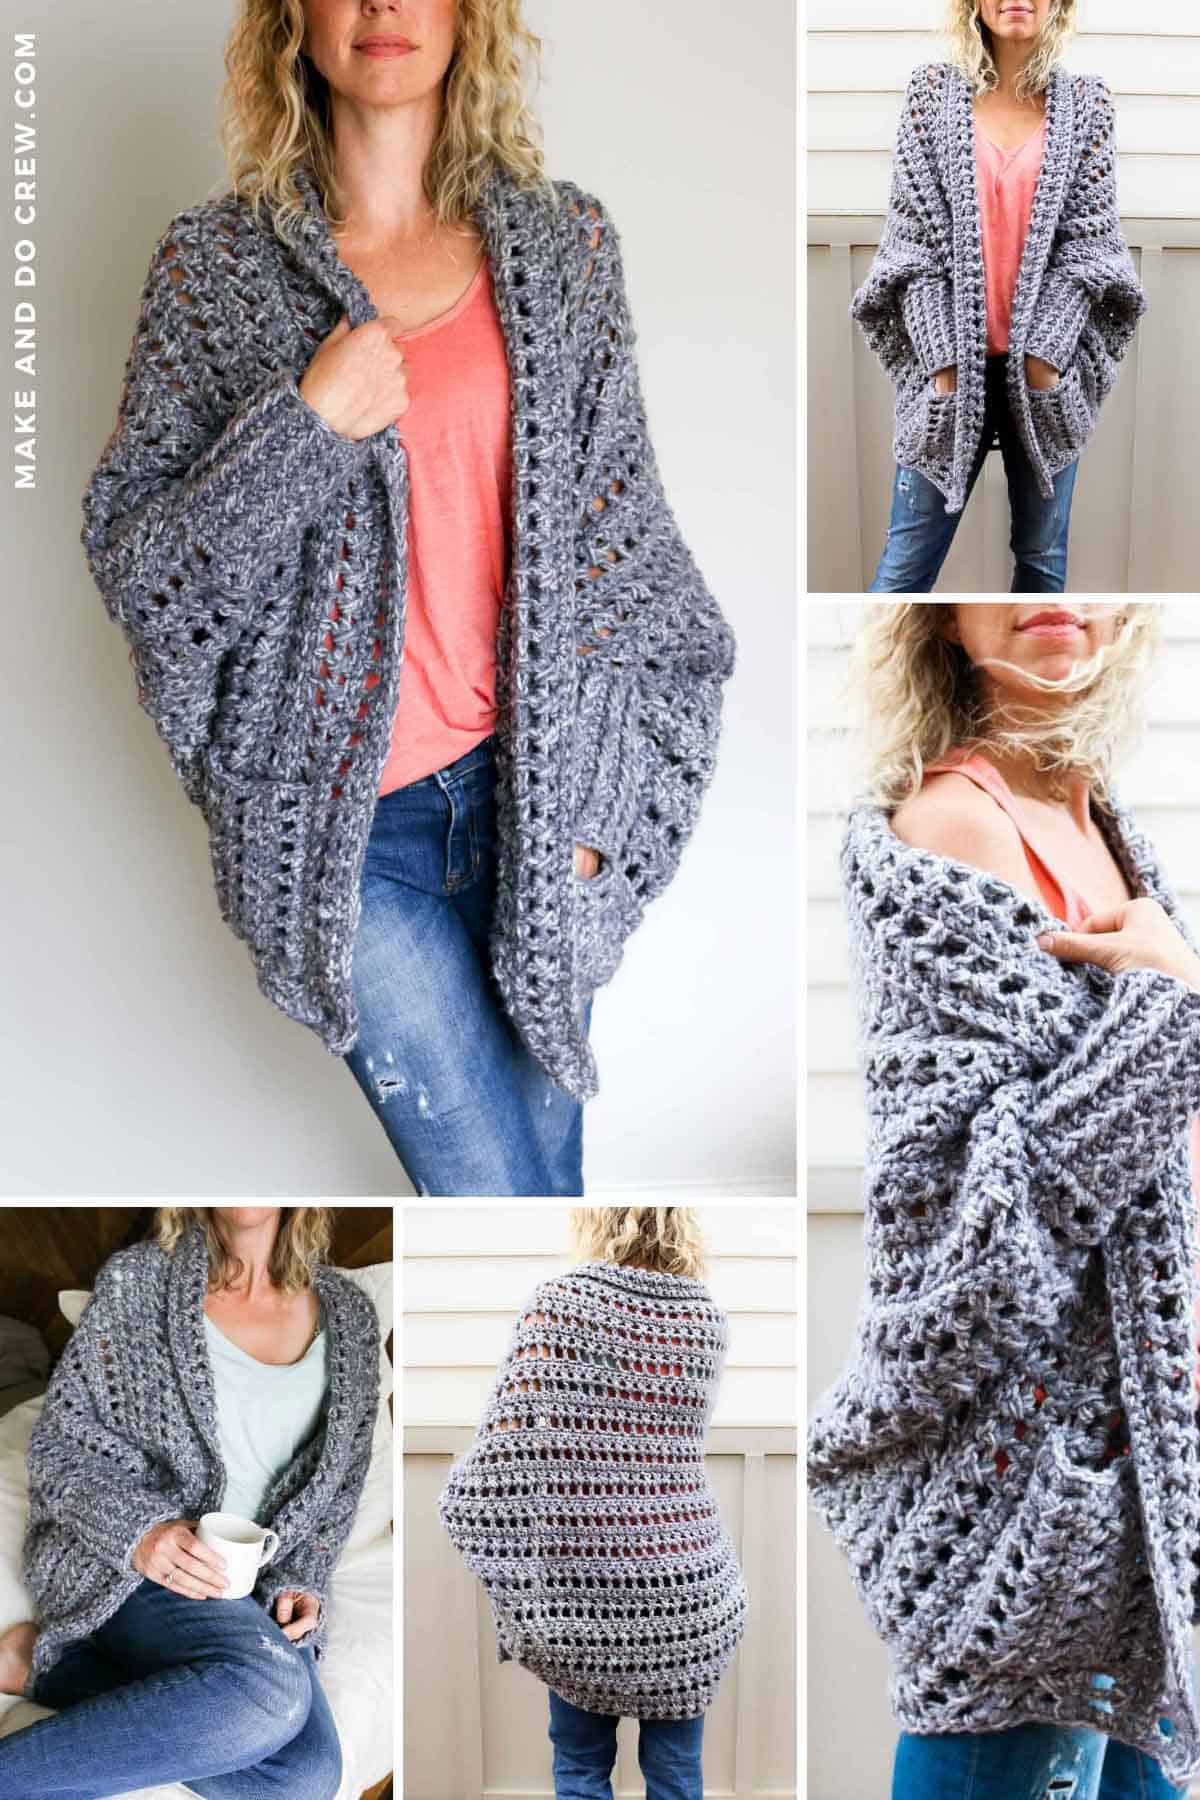 This image shows a free crochet cardigan pattern. There are several photos in this grid, showing different angles of the crochet sweater (being worn by a blonde woman).